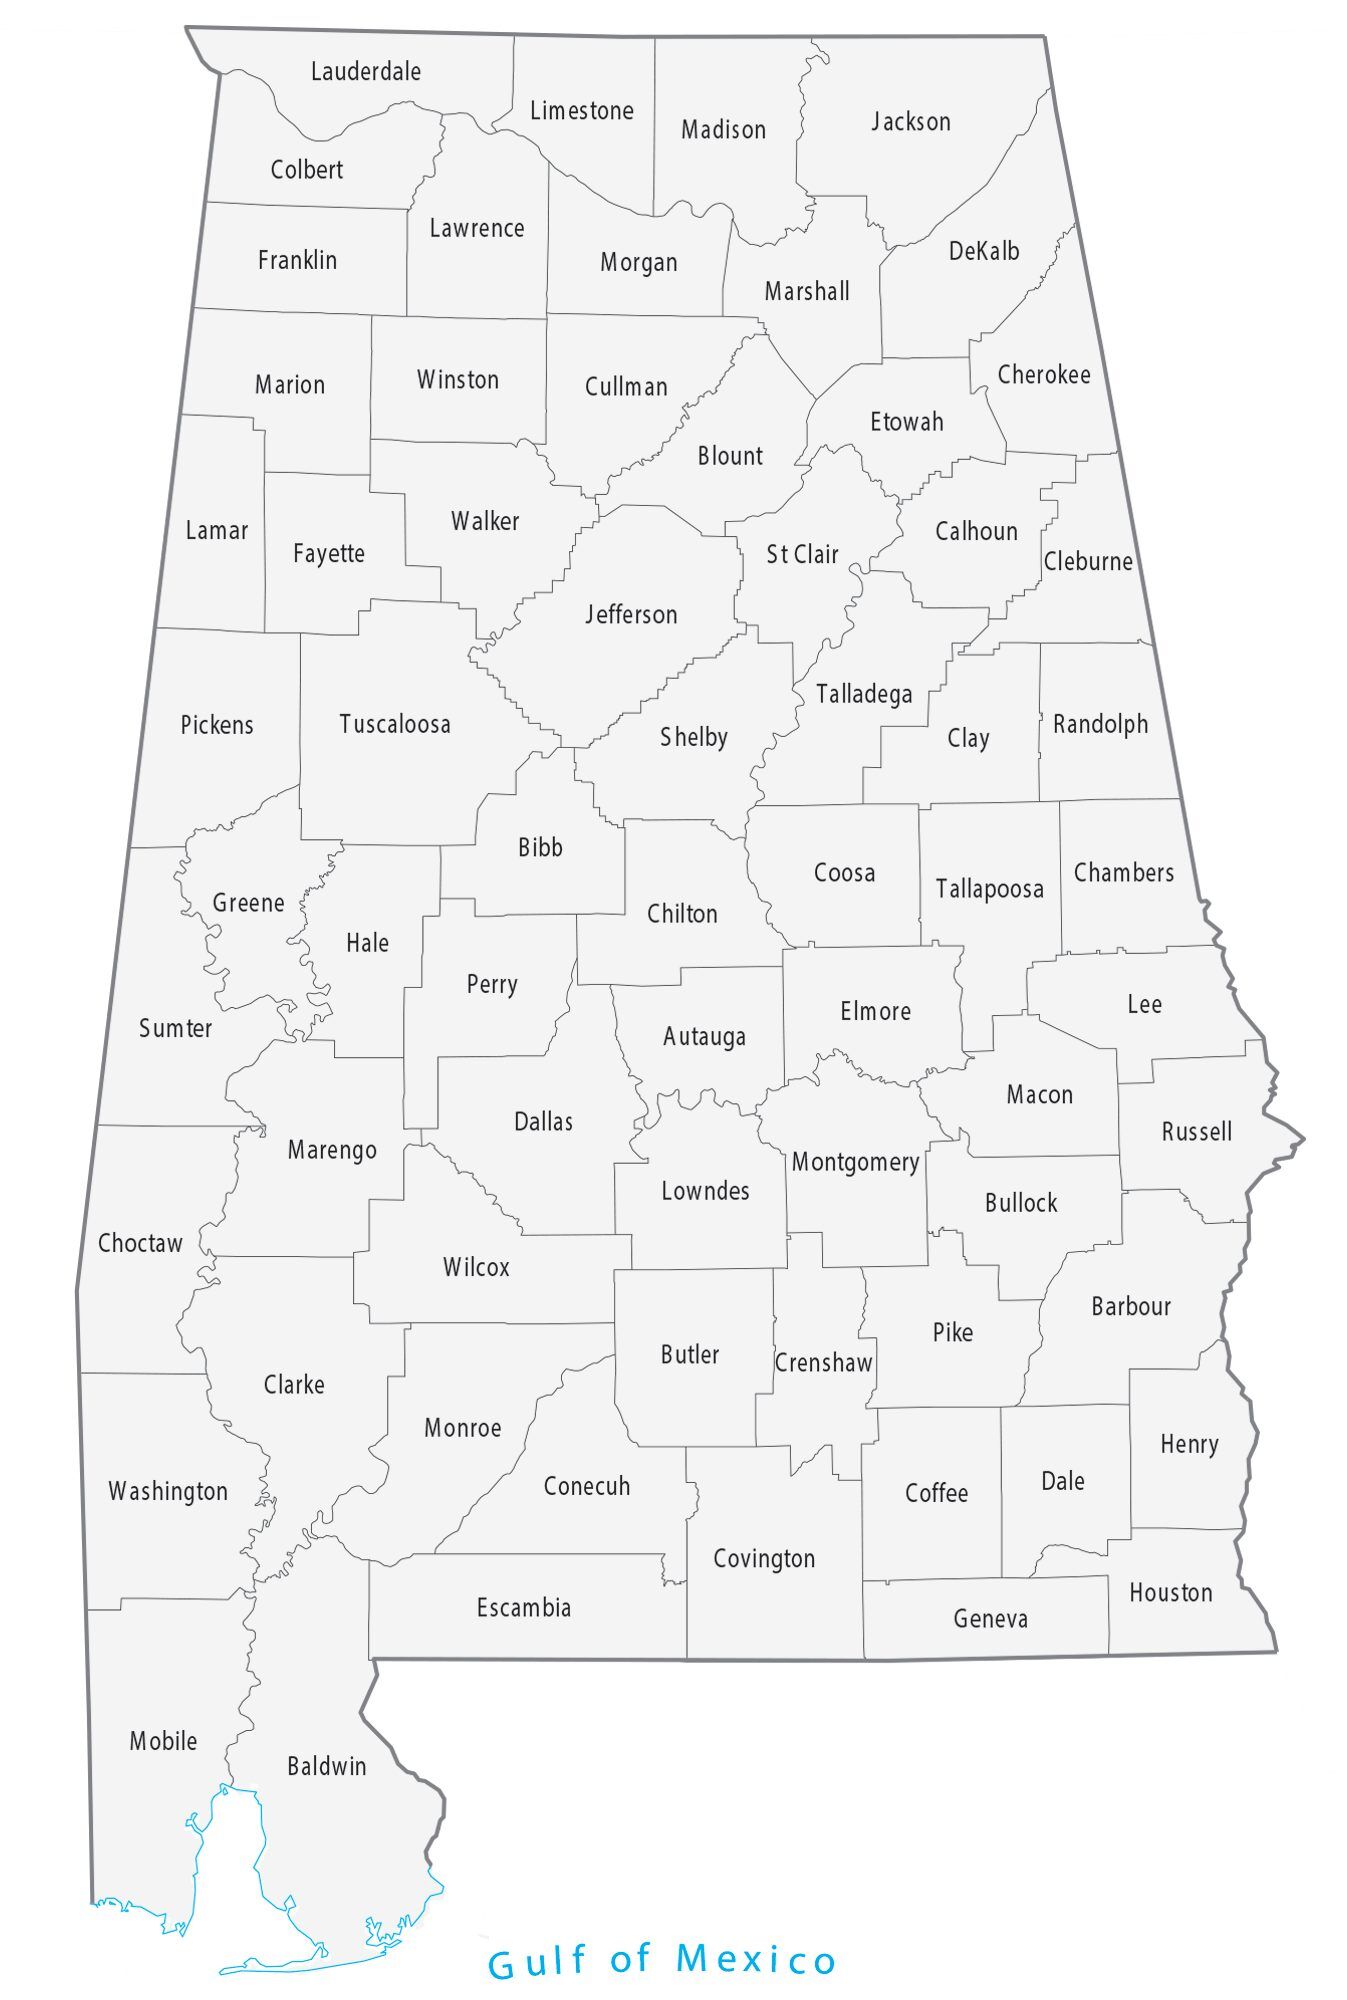 Dale County Gis Map Alabama County Map - Gis Geography